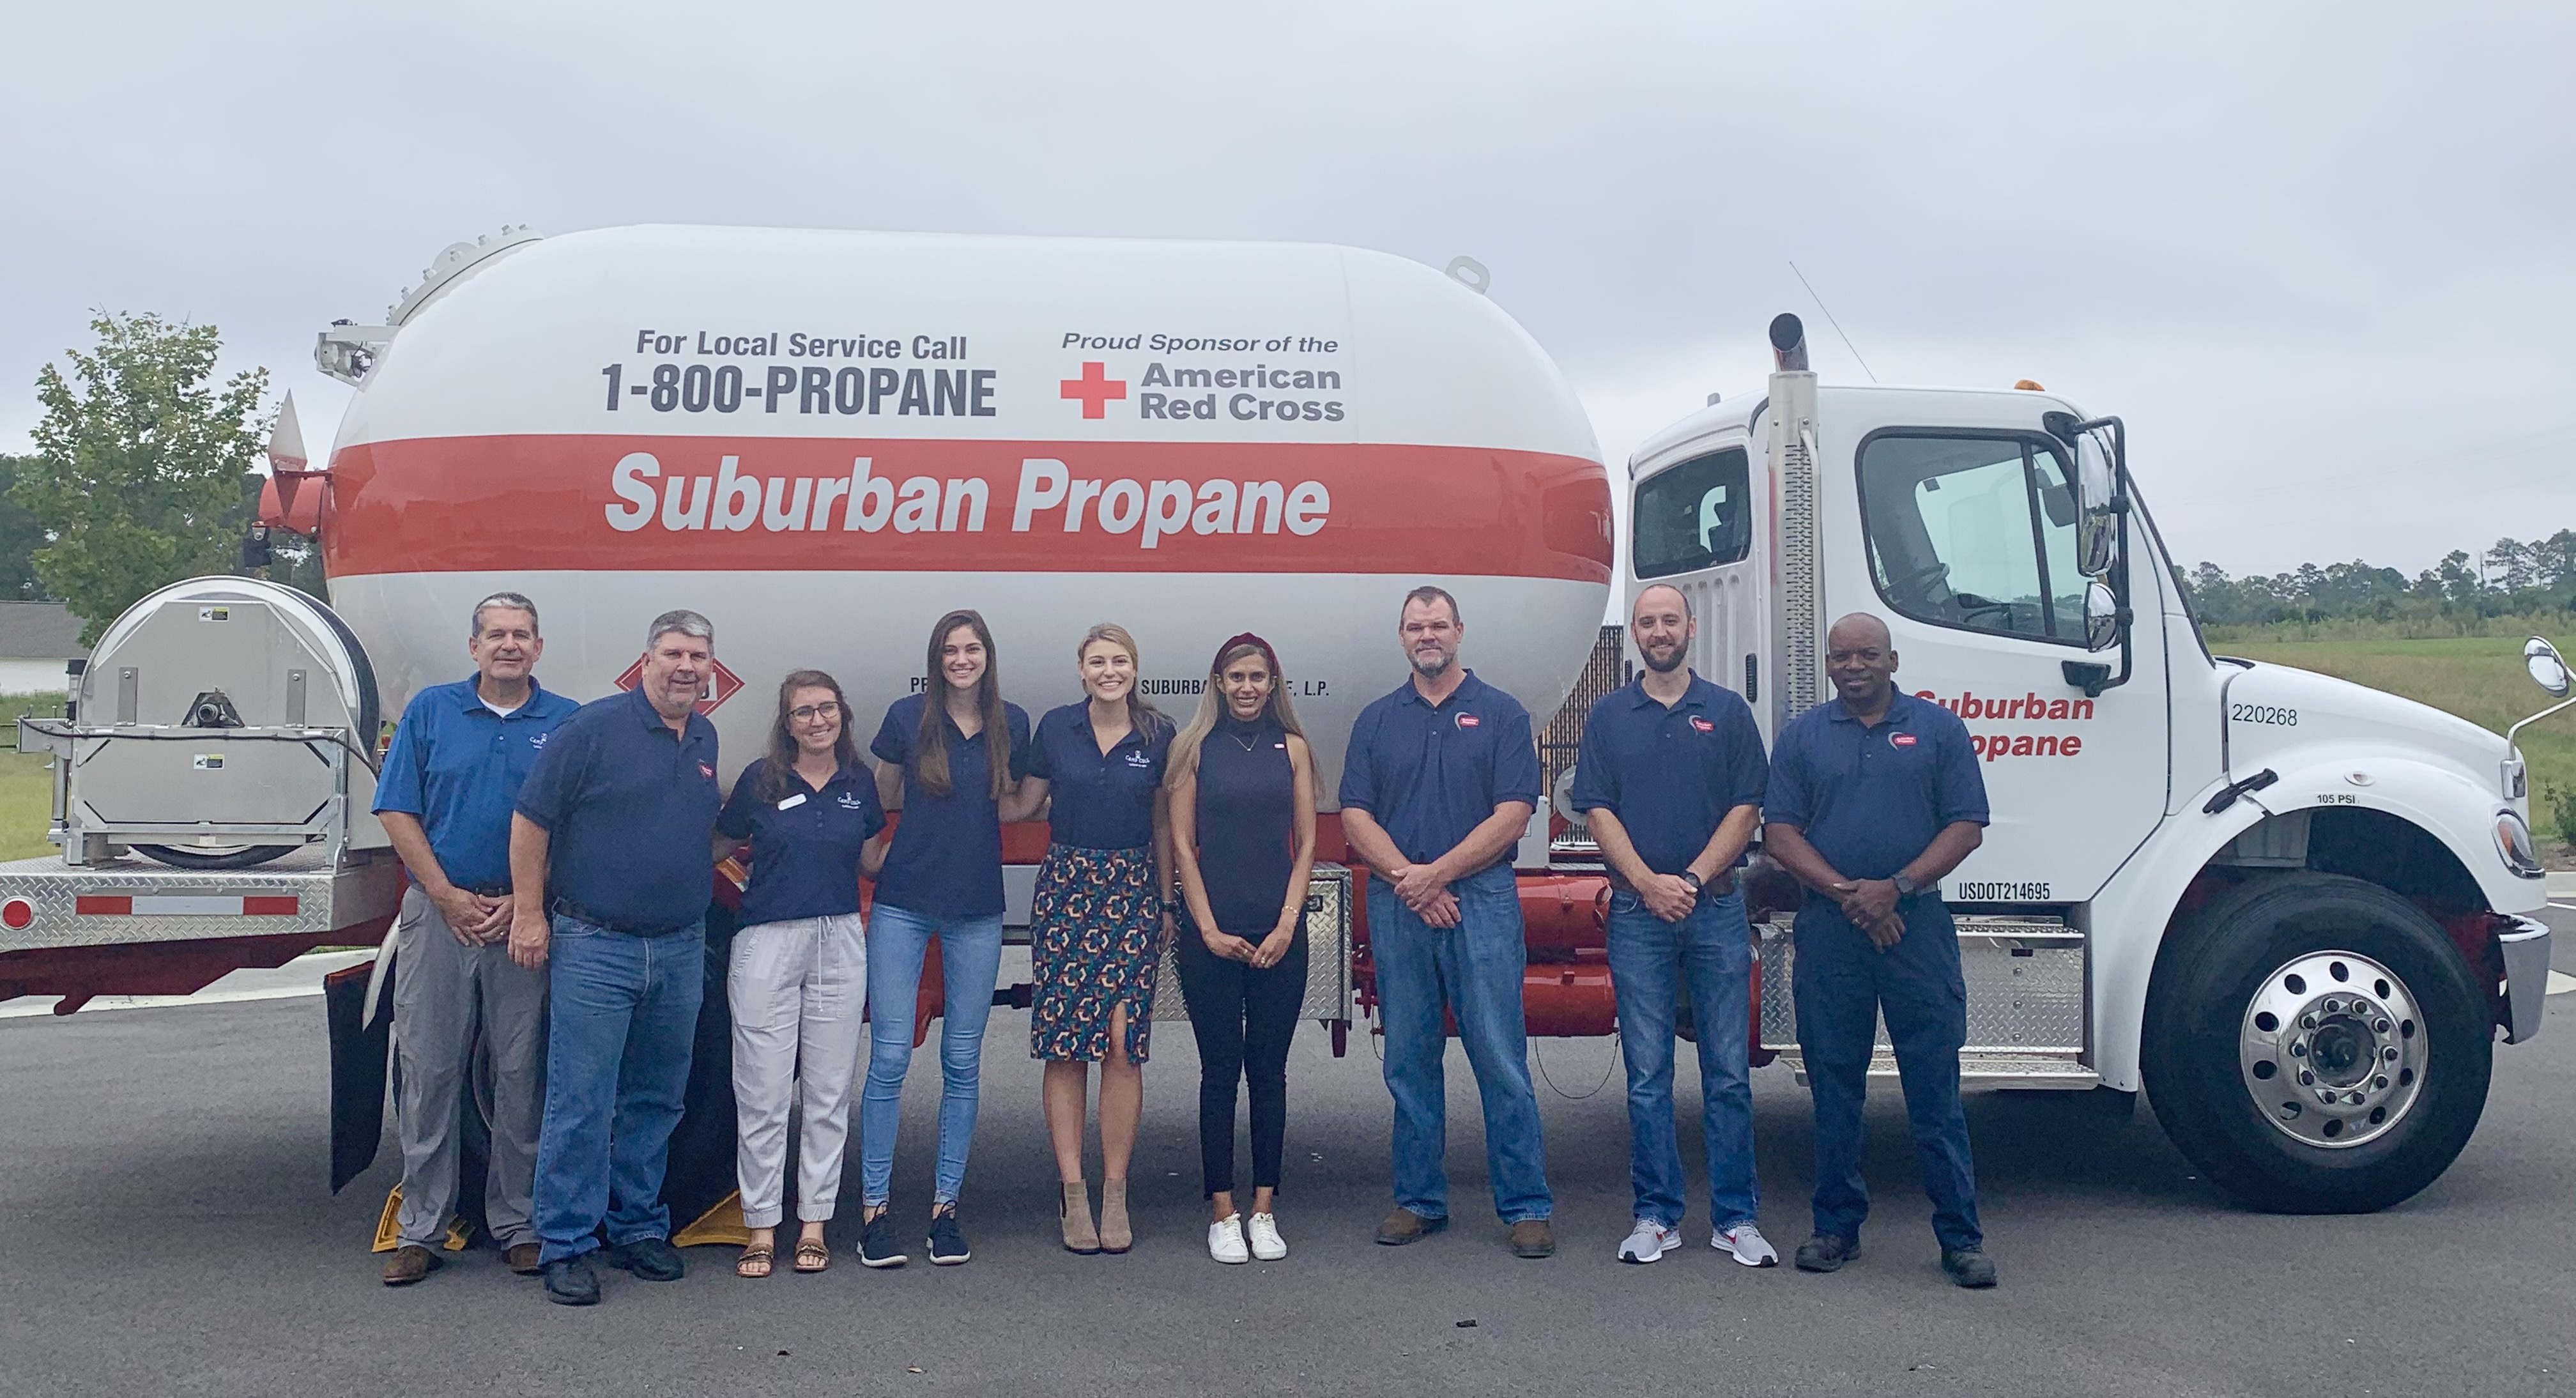 Suburban Propane Partners collaborates with Camp Cole